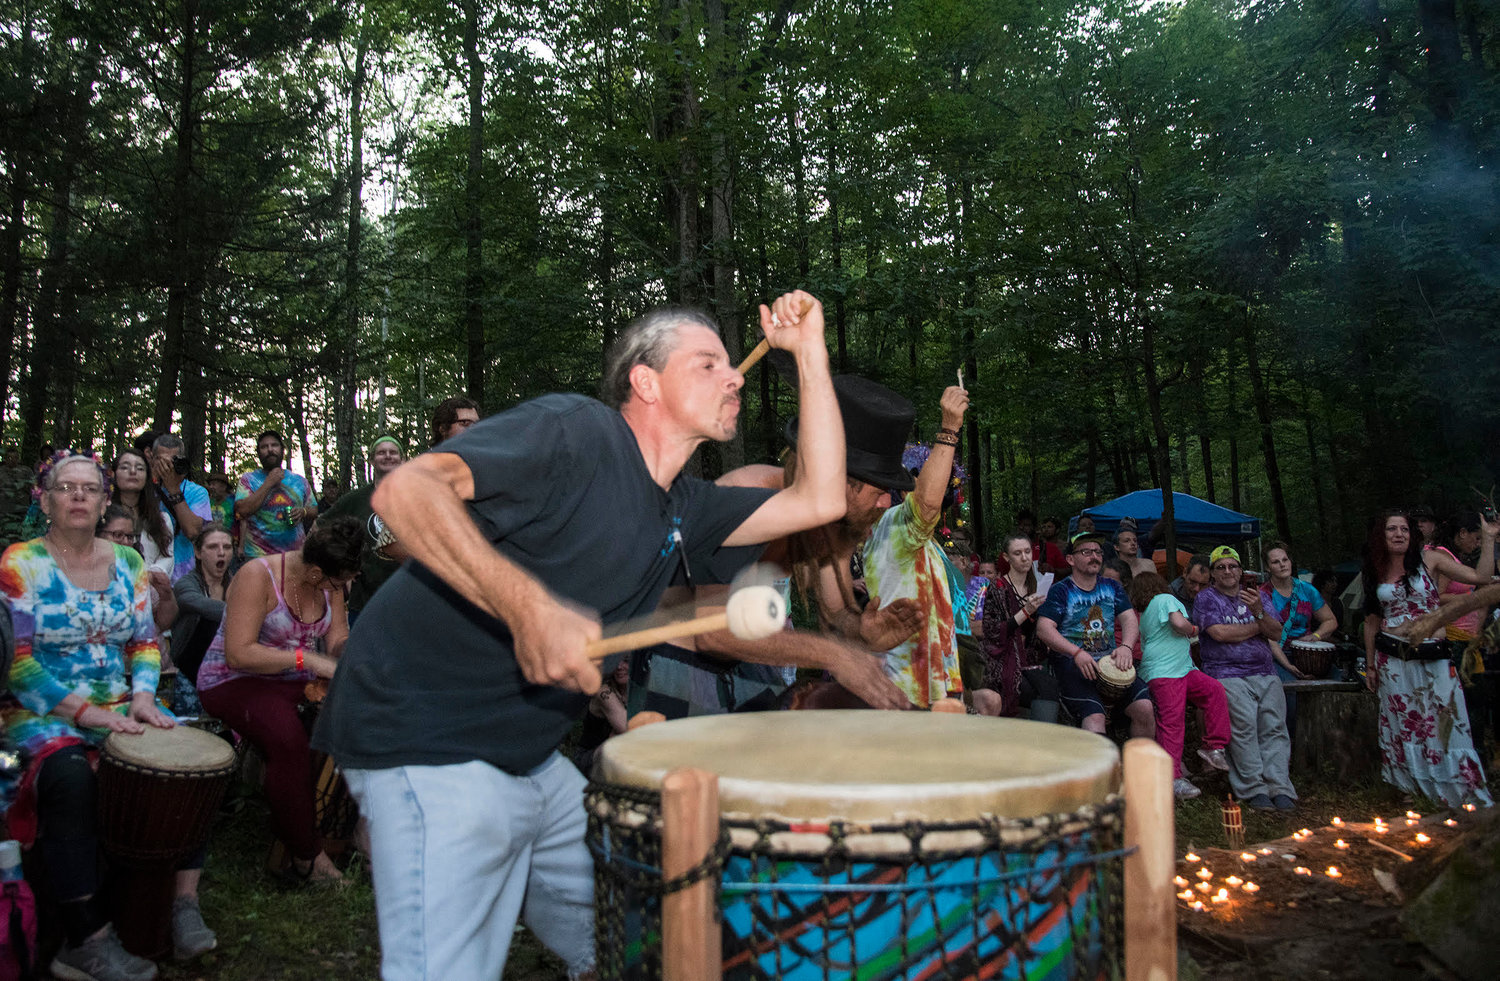 The annual Yasgur Road Reunion drum circle in motion.